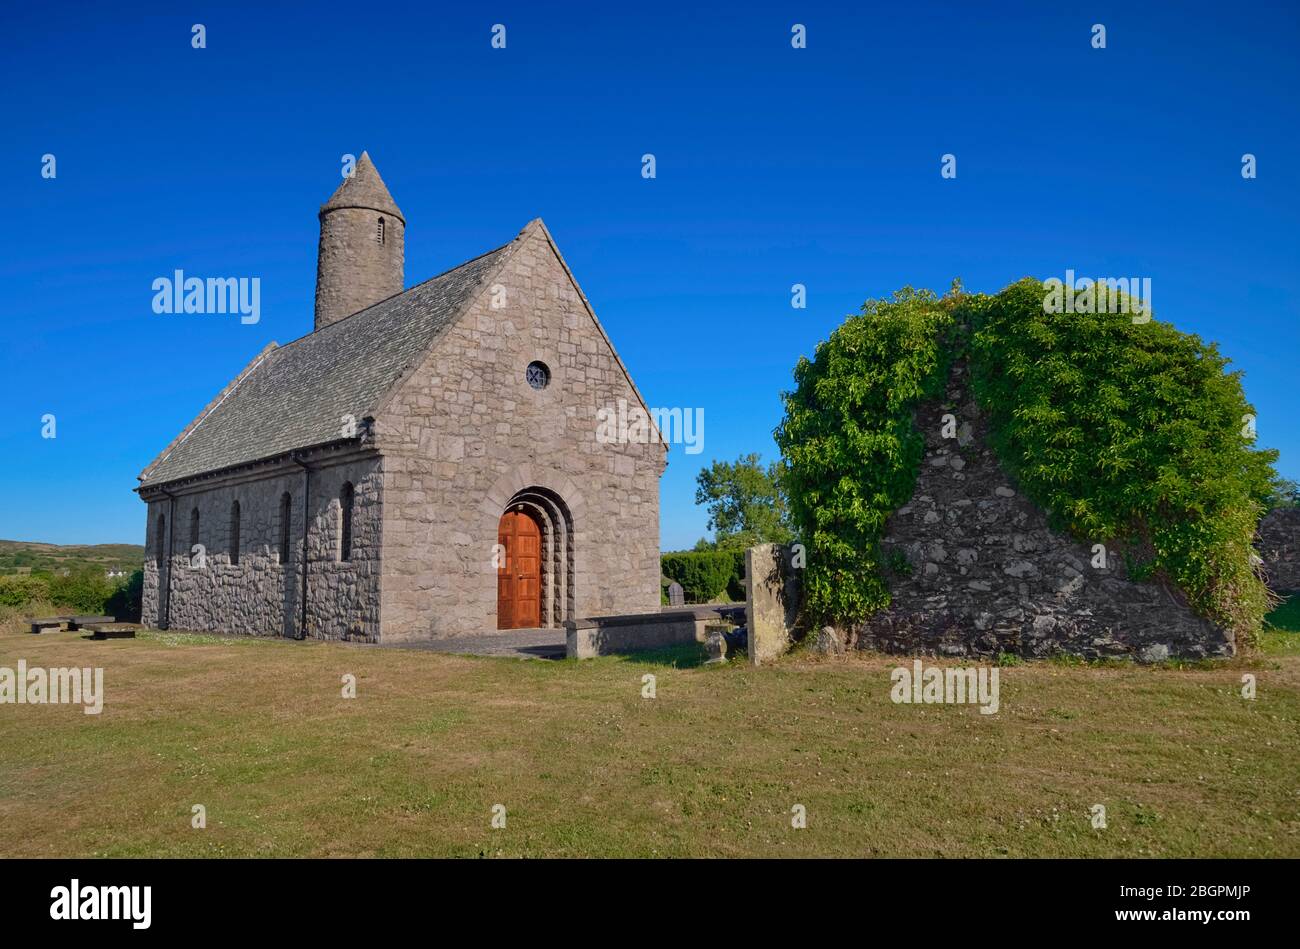 Ireland, County Down, Saul, Commemorative church built in 1933 on the site of St Patrick's first church in Ireland. Stock Photo